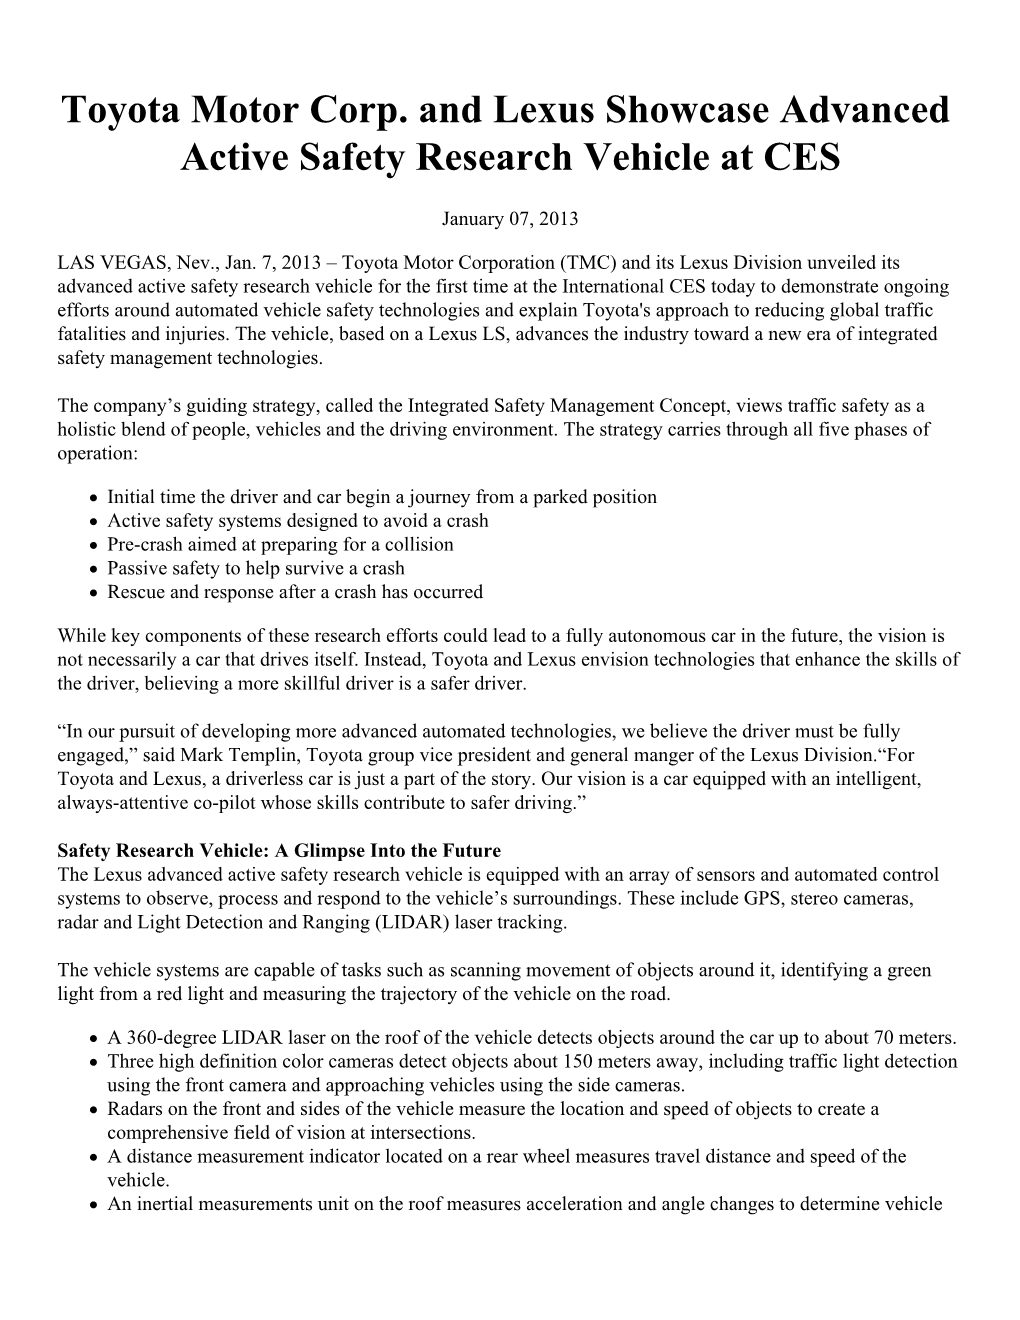 Toyota Motor Corp. and Lexus Showcase Advanced Active Safety Research Vehicle at CES